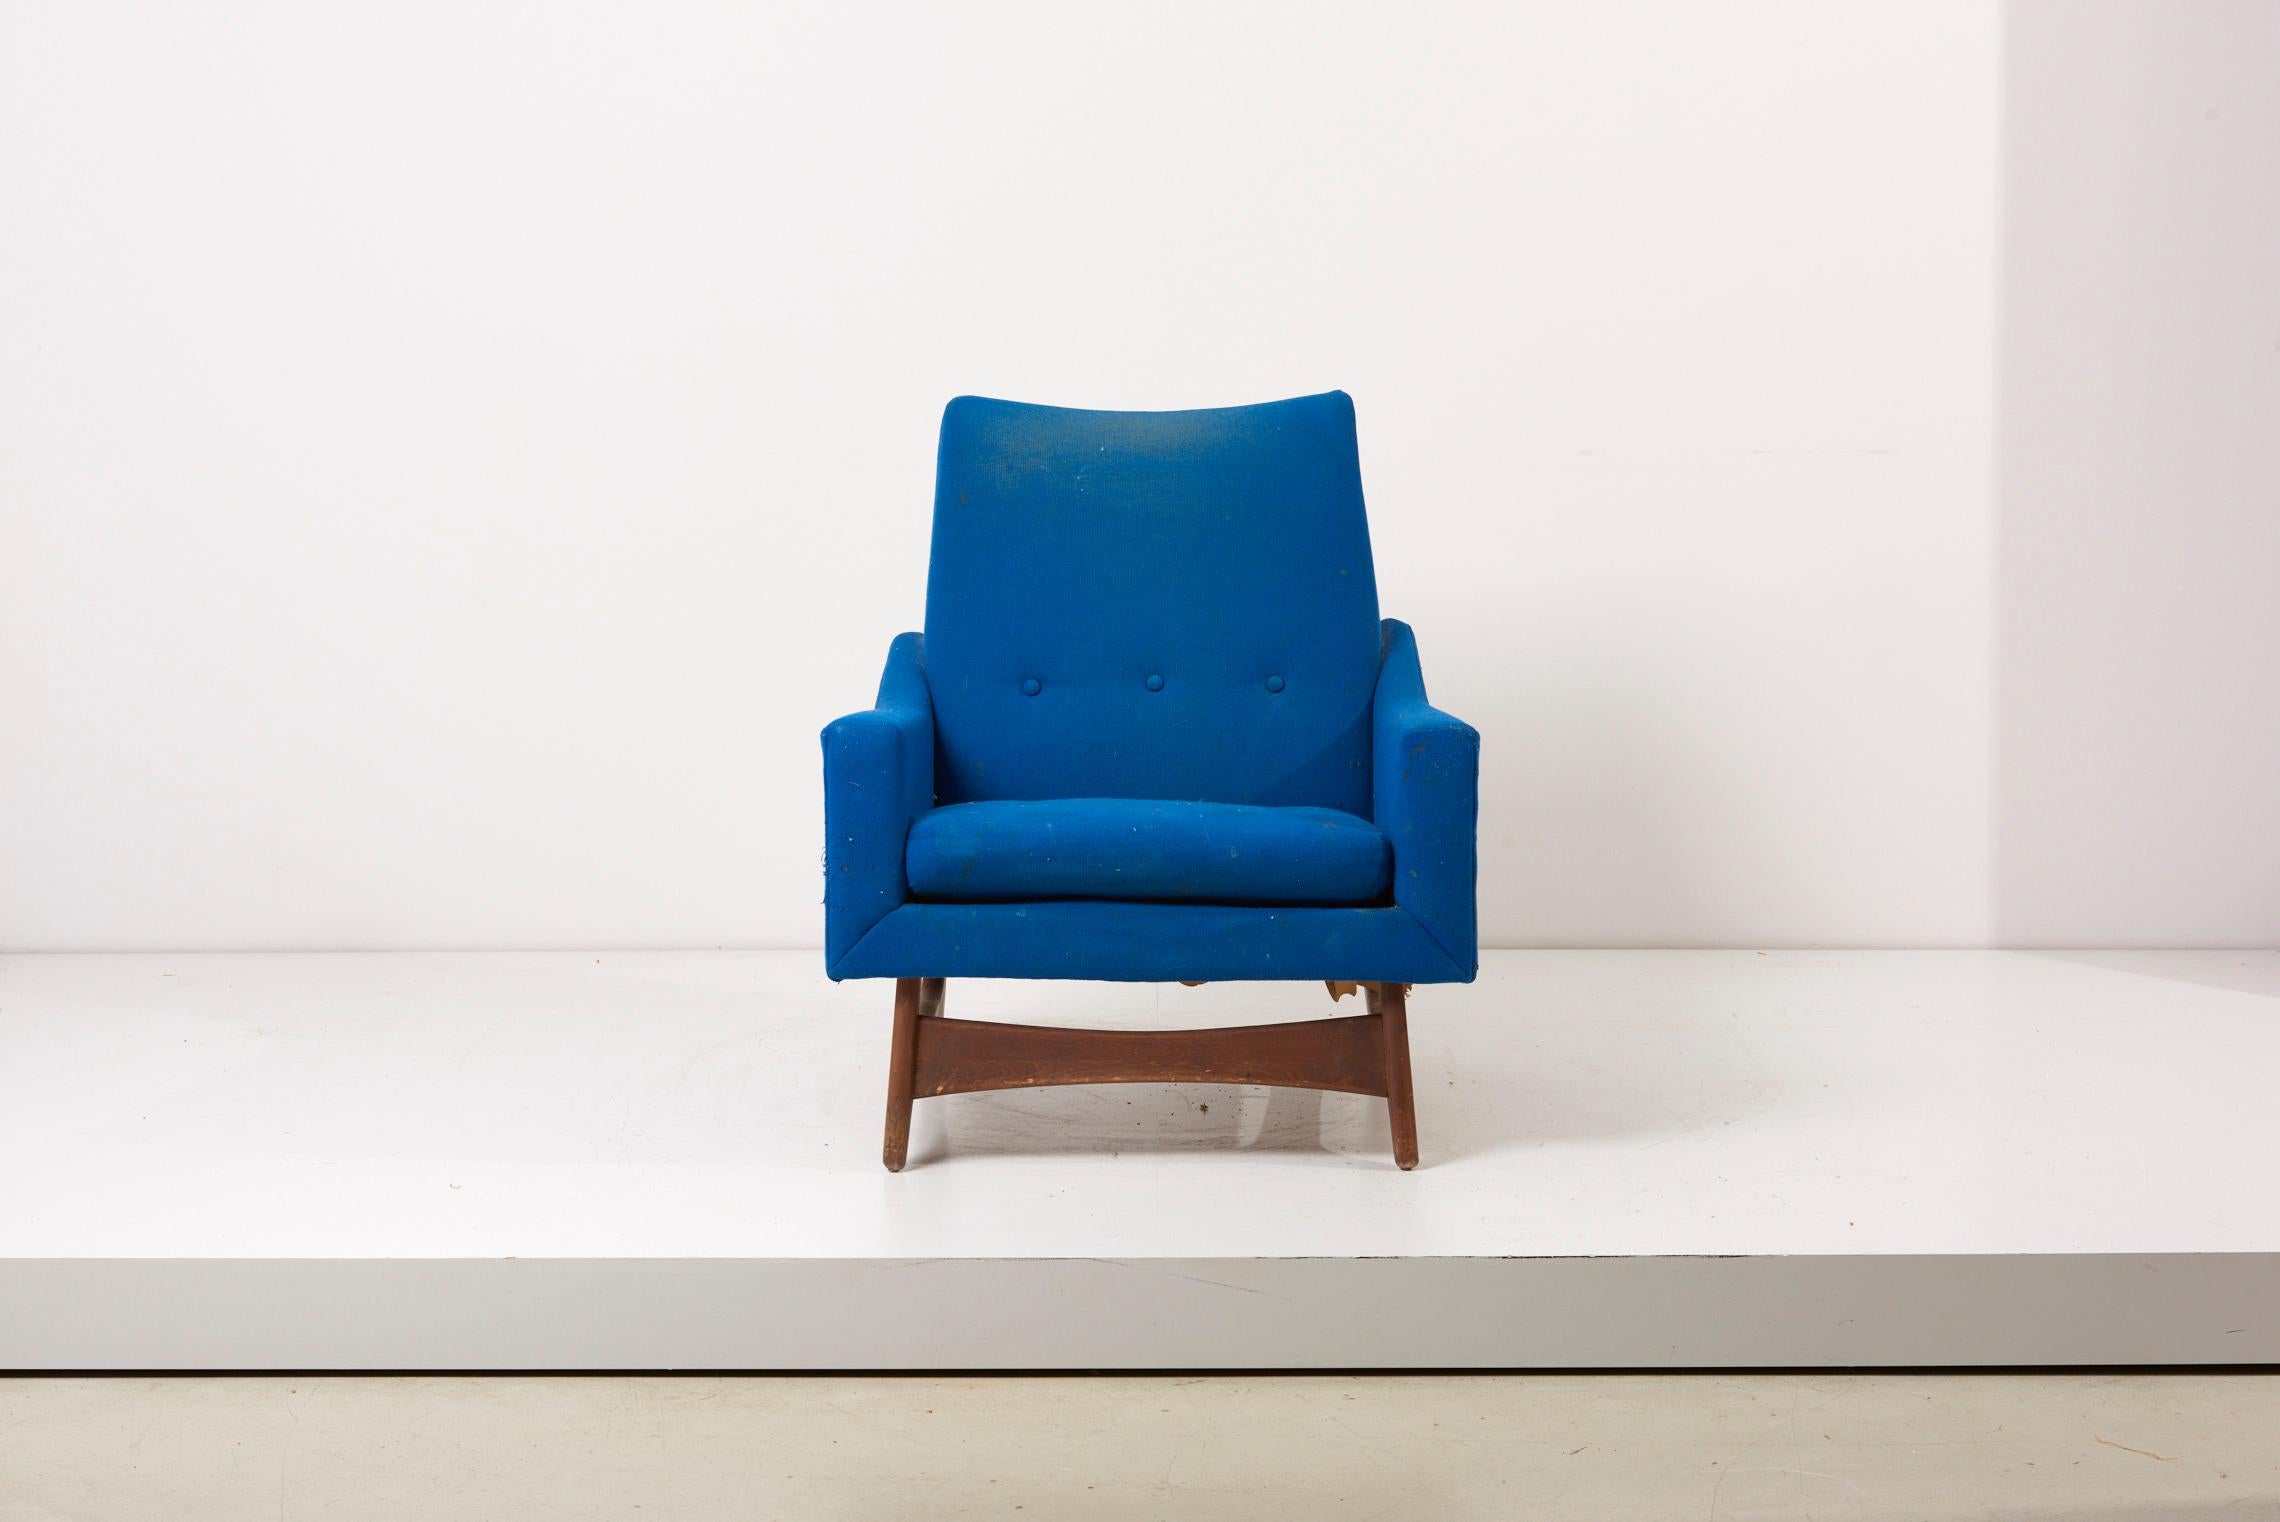 Adrian Pearsall lounge chair in cobalt blue fabric and wooden legs, USA 1960s. The chair is in original condition with vintage upholstery. We offer reupholstery in our in-house workshop.